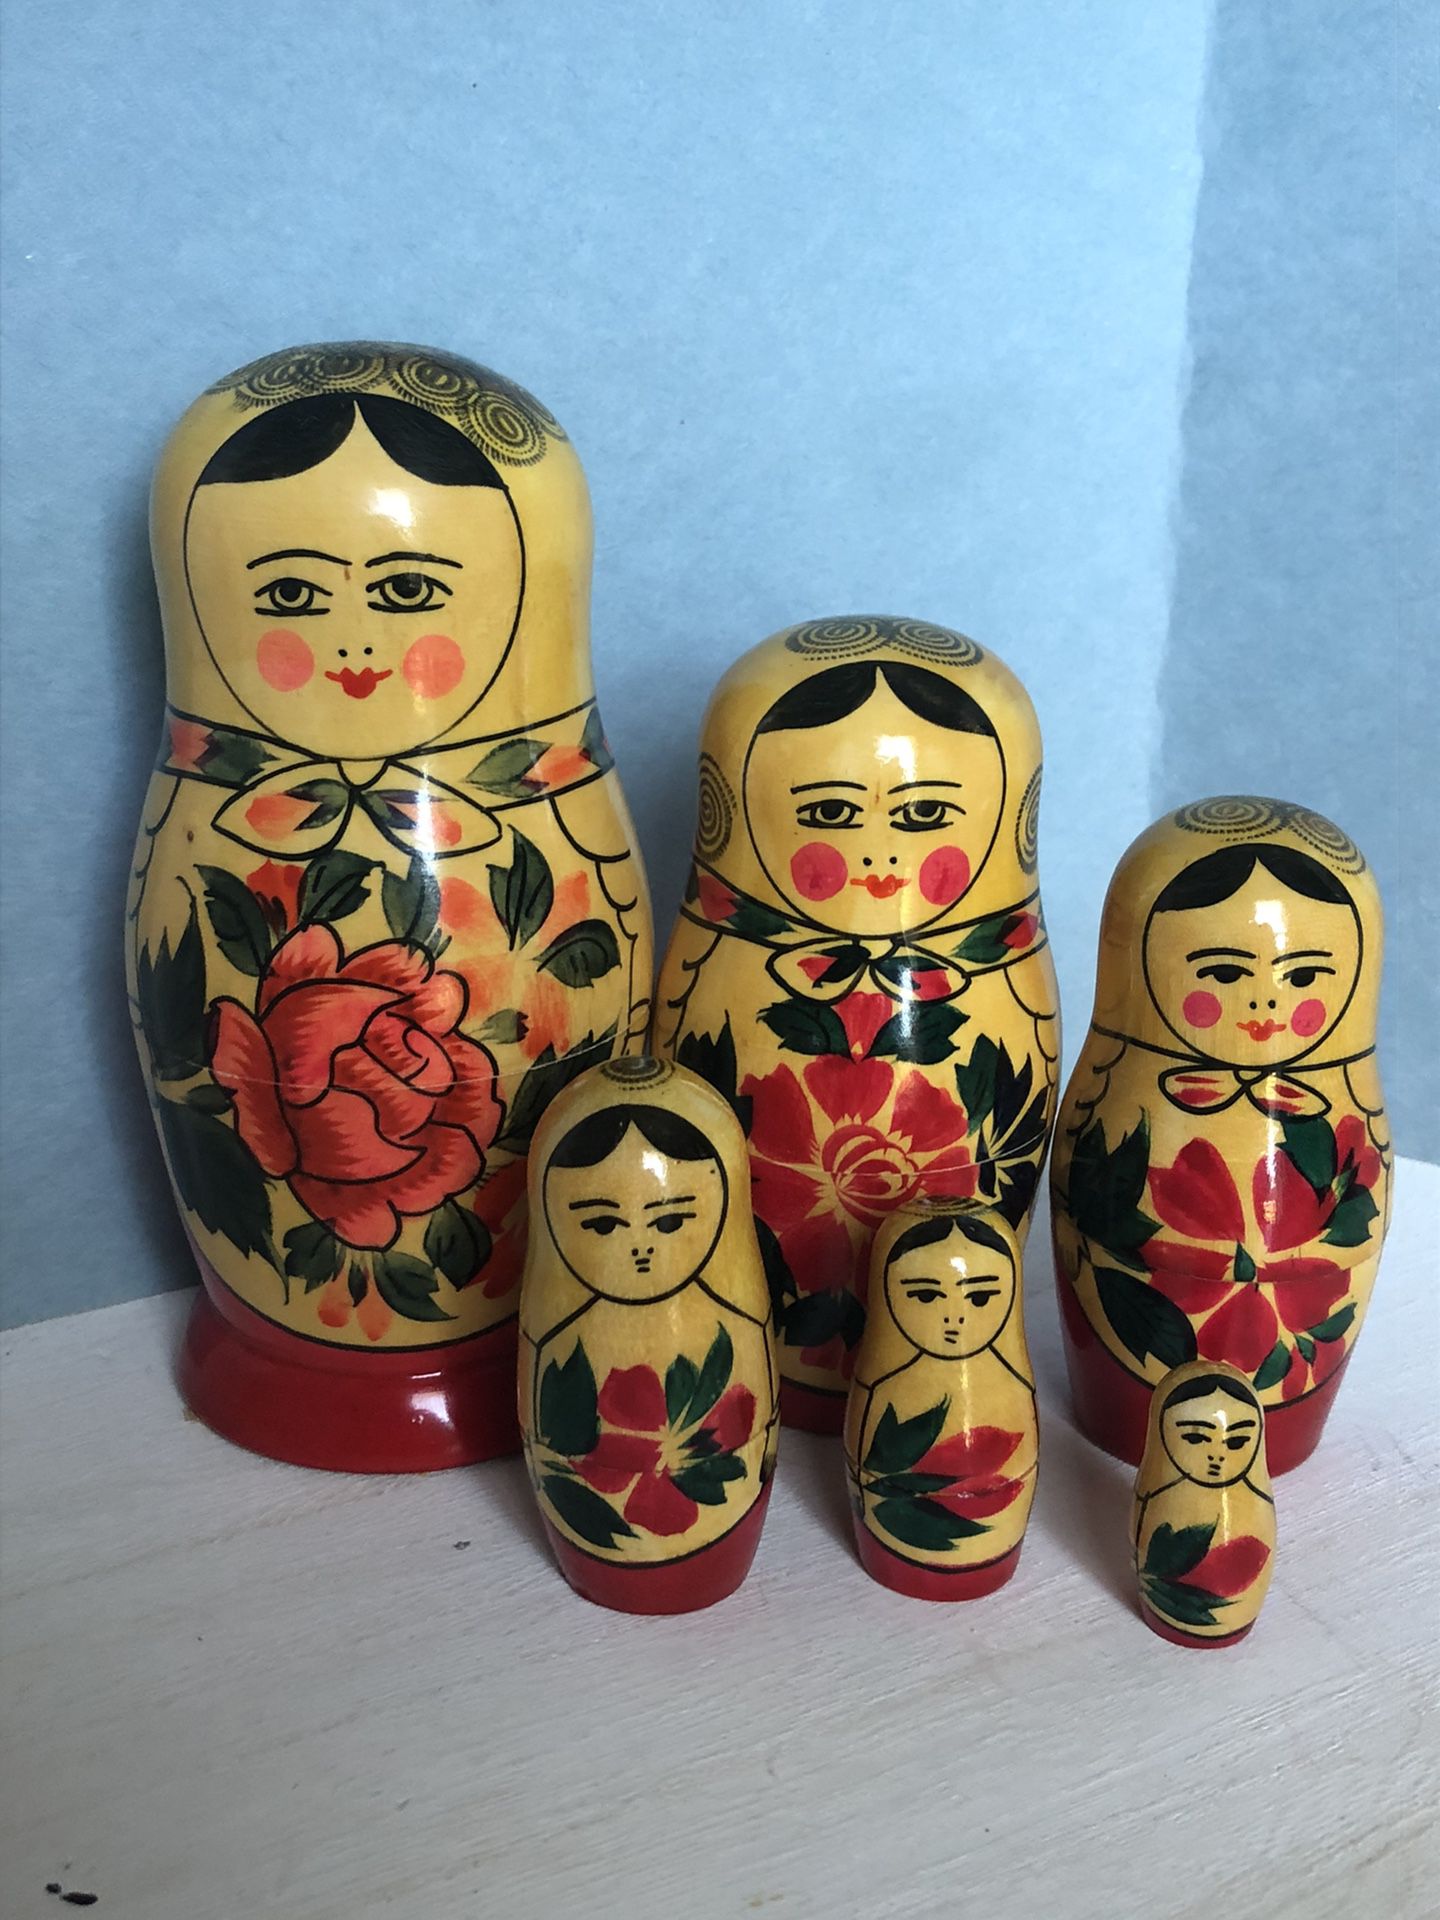 Vintage Russian Nesting Dolls - Hand Painted Set of 6